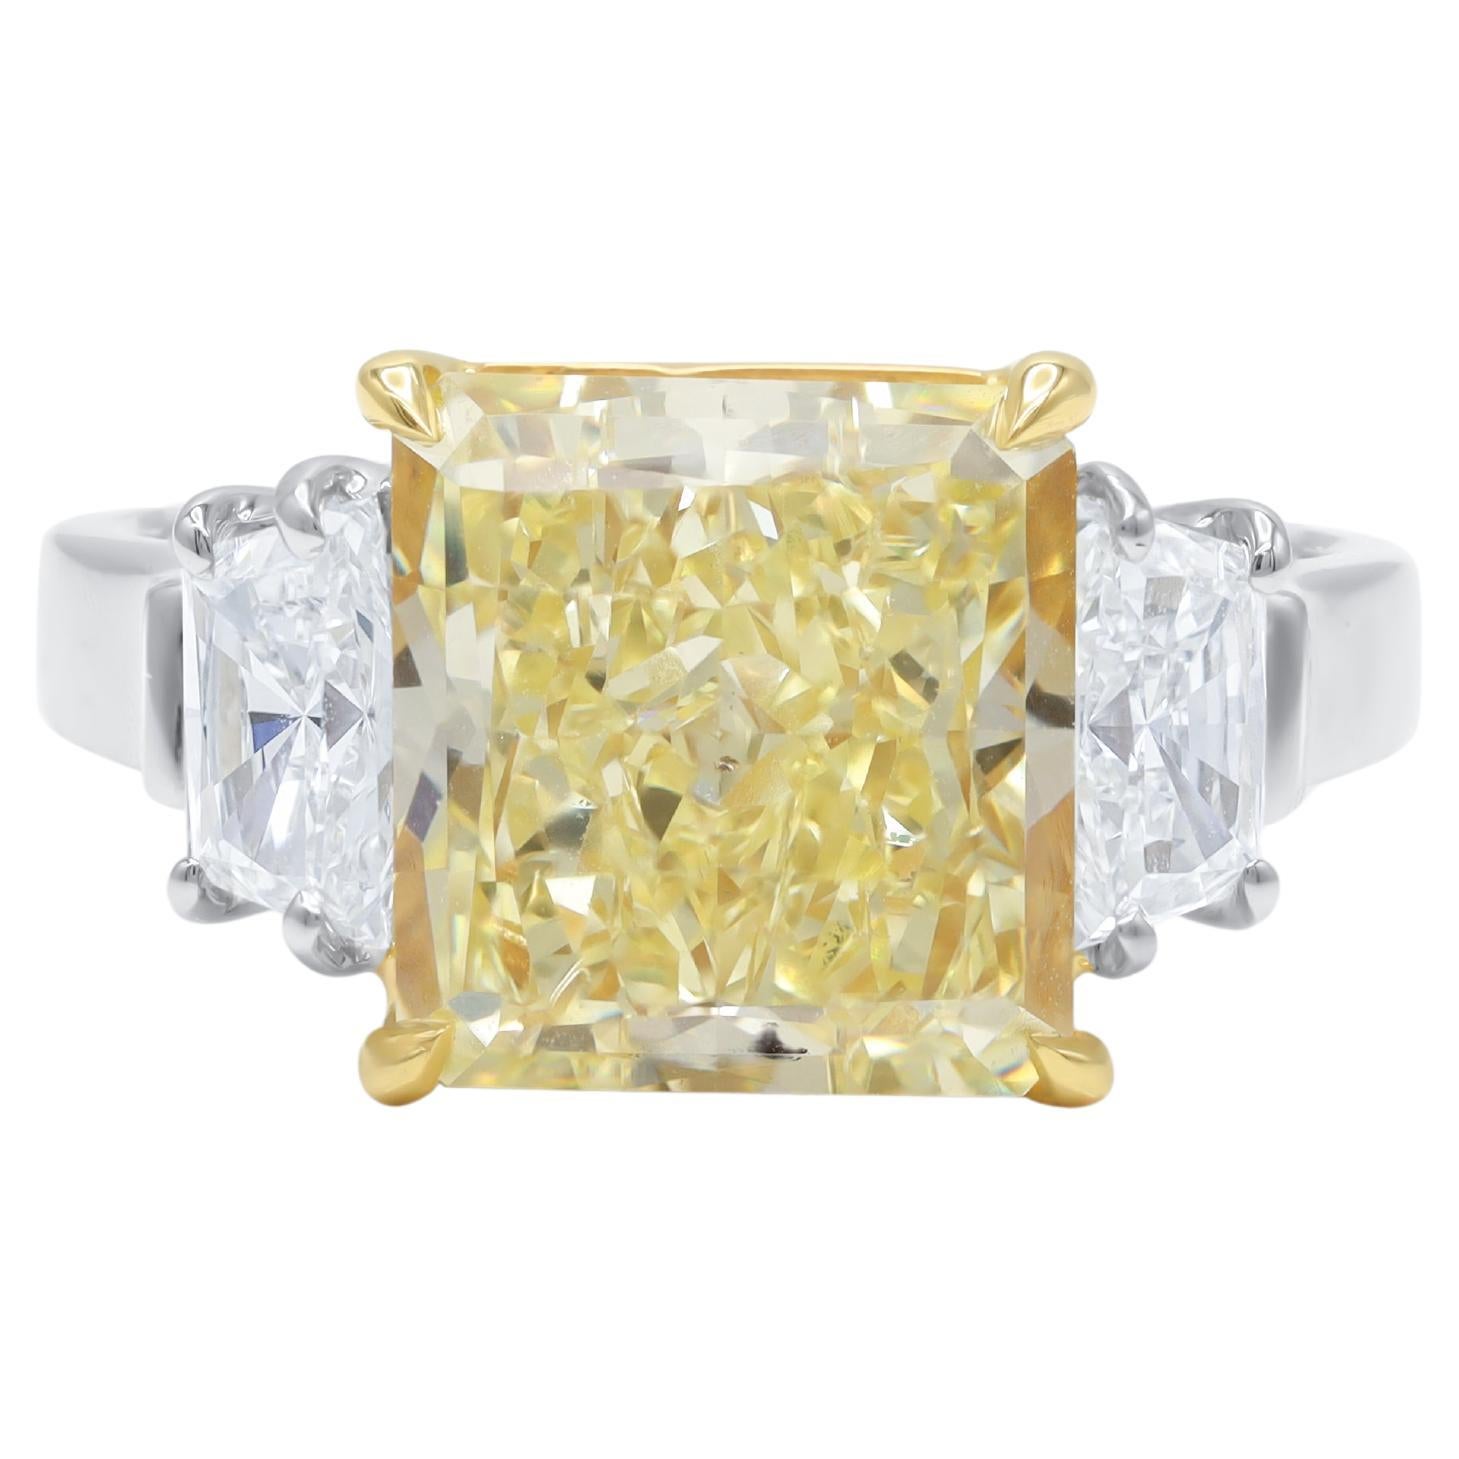 Diana M. Platinum Engagement 3 Stone Ring With 5.16 Fancy Yellow SI1 Radiant  For Sale